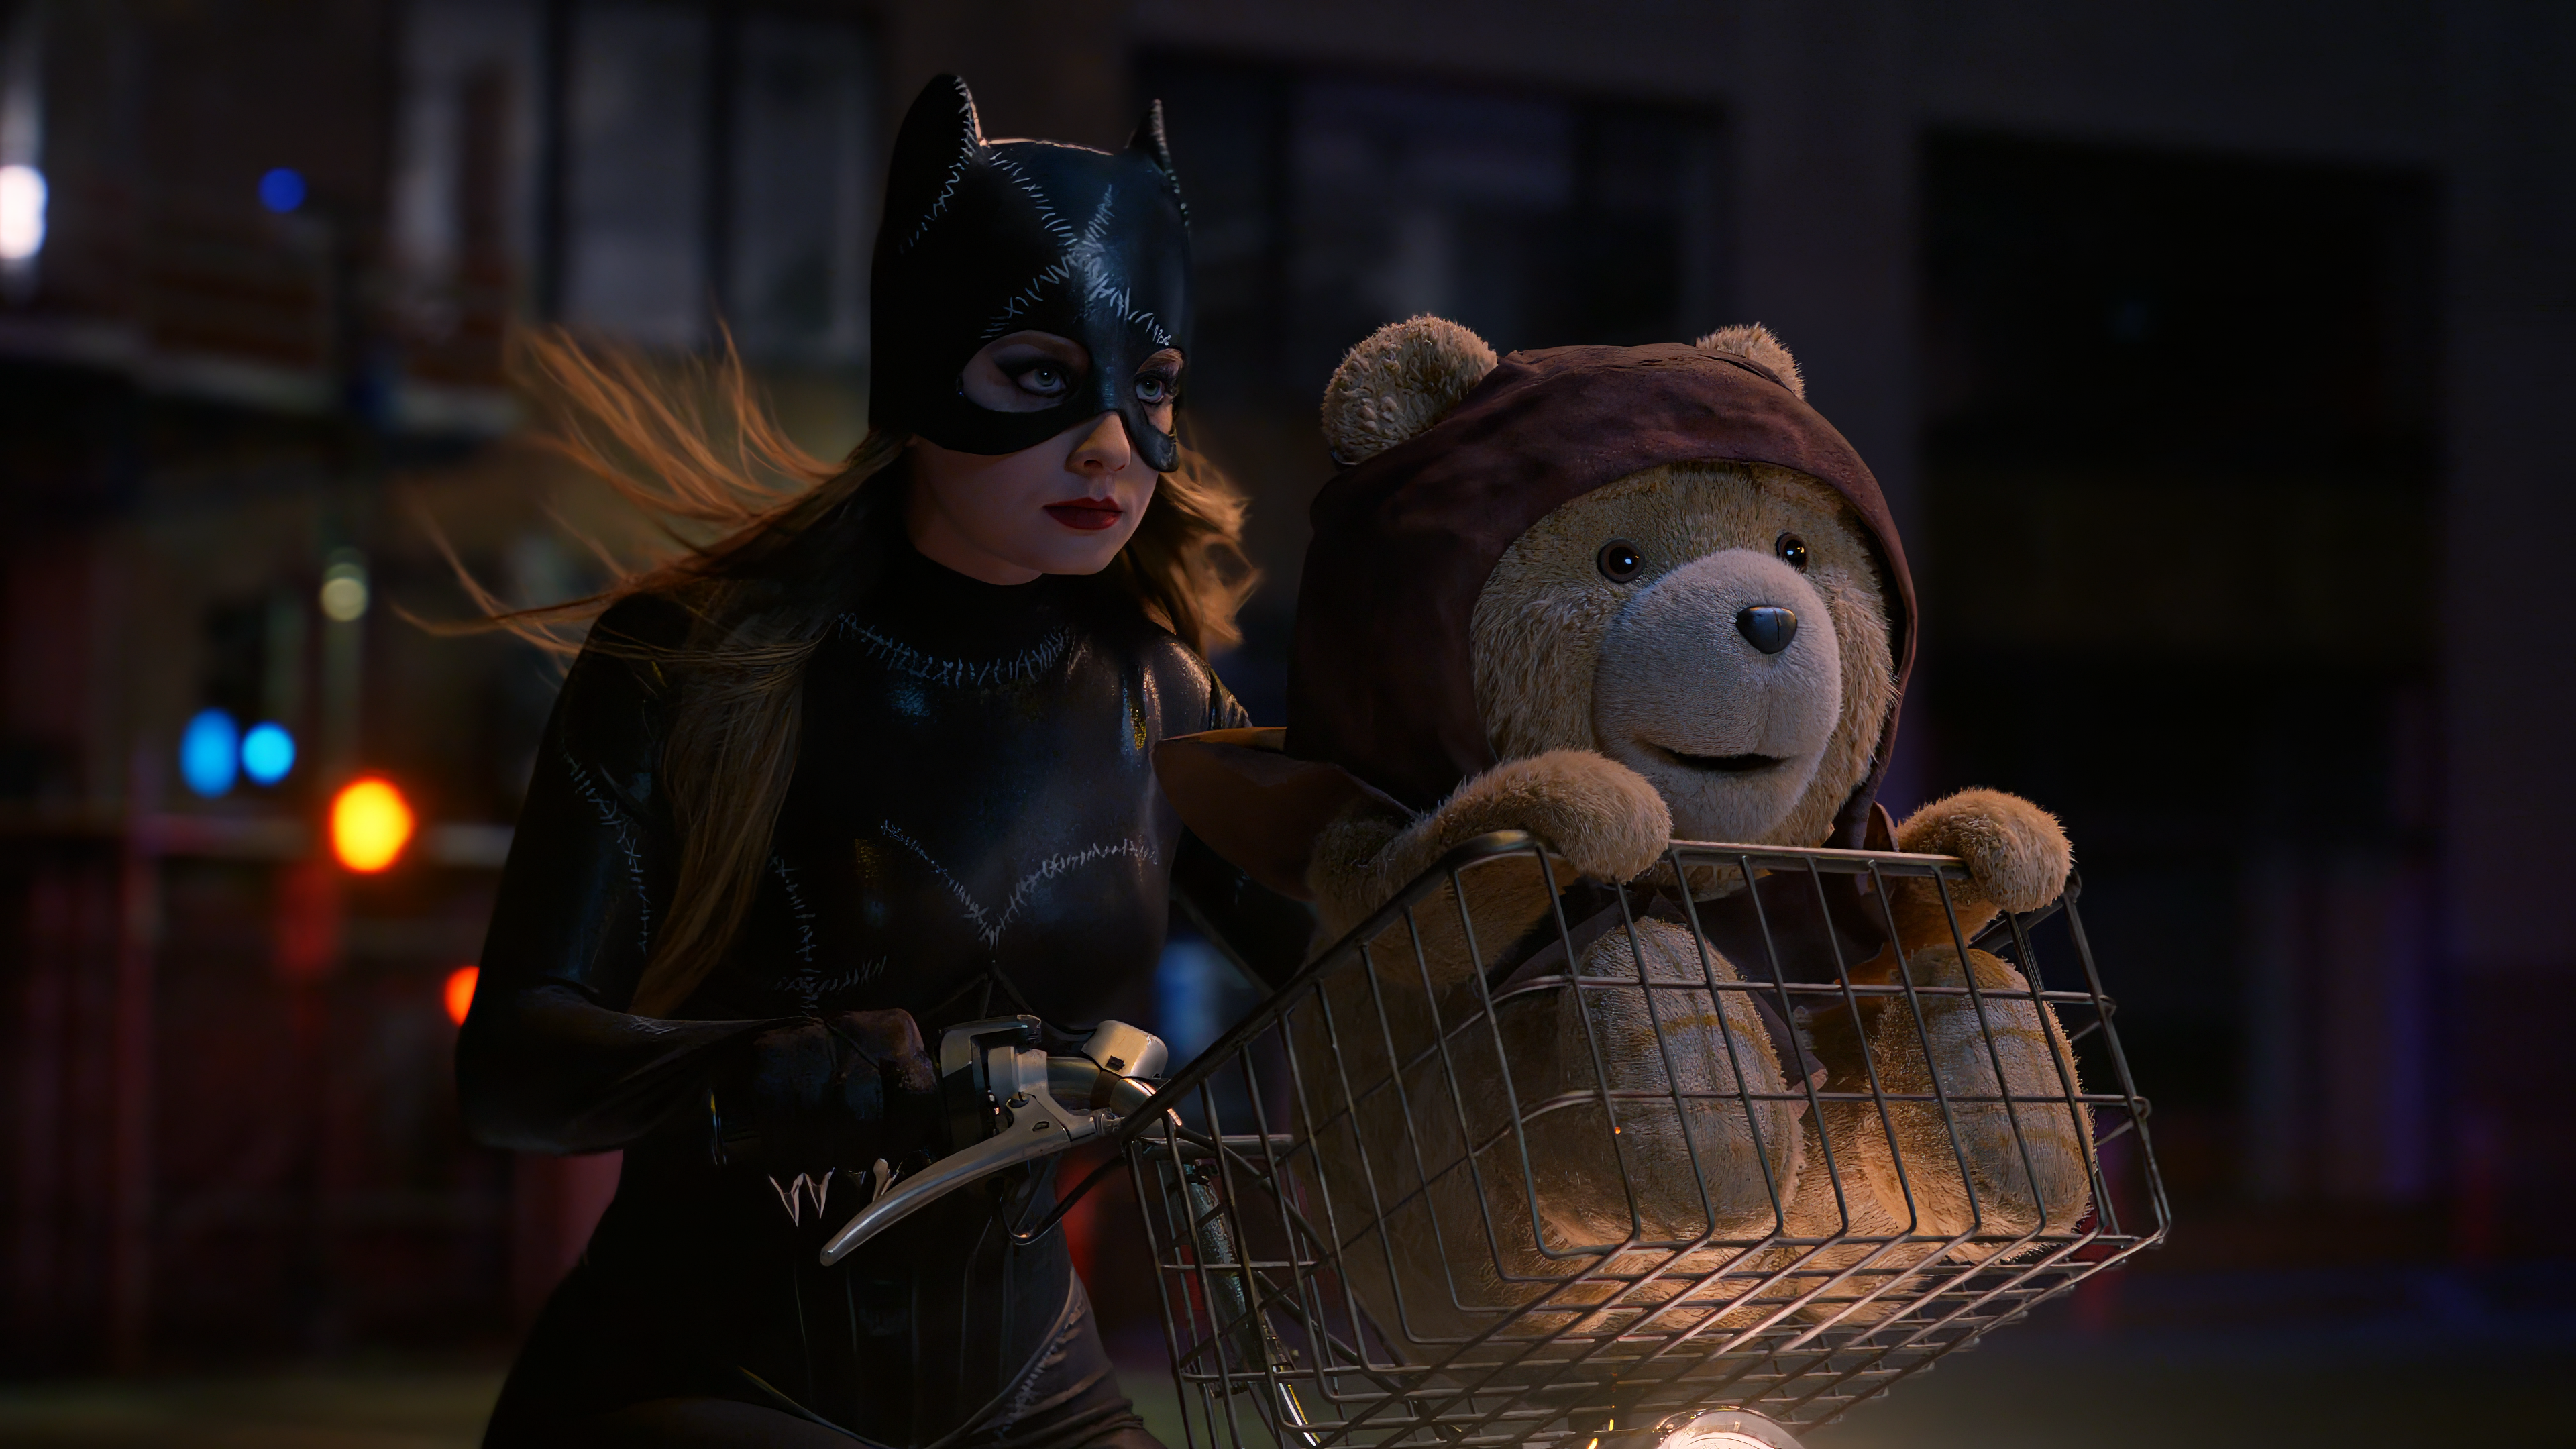 General 3840x2160 Ted (movie) teddy bears screen shot bicycle movies movie characters Catwoman latex bodysuit E.T. depth of field crossover biker girl red lipstick lipstick blurred blurry background